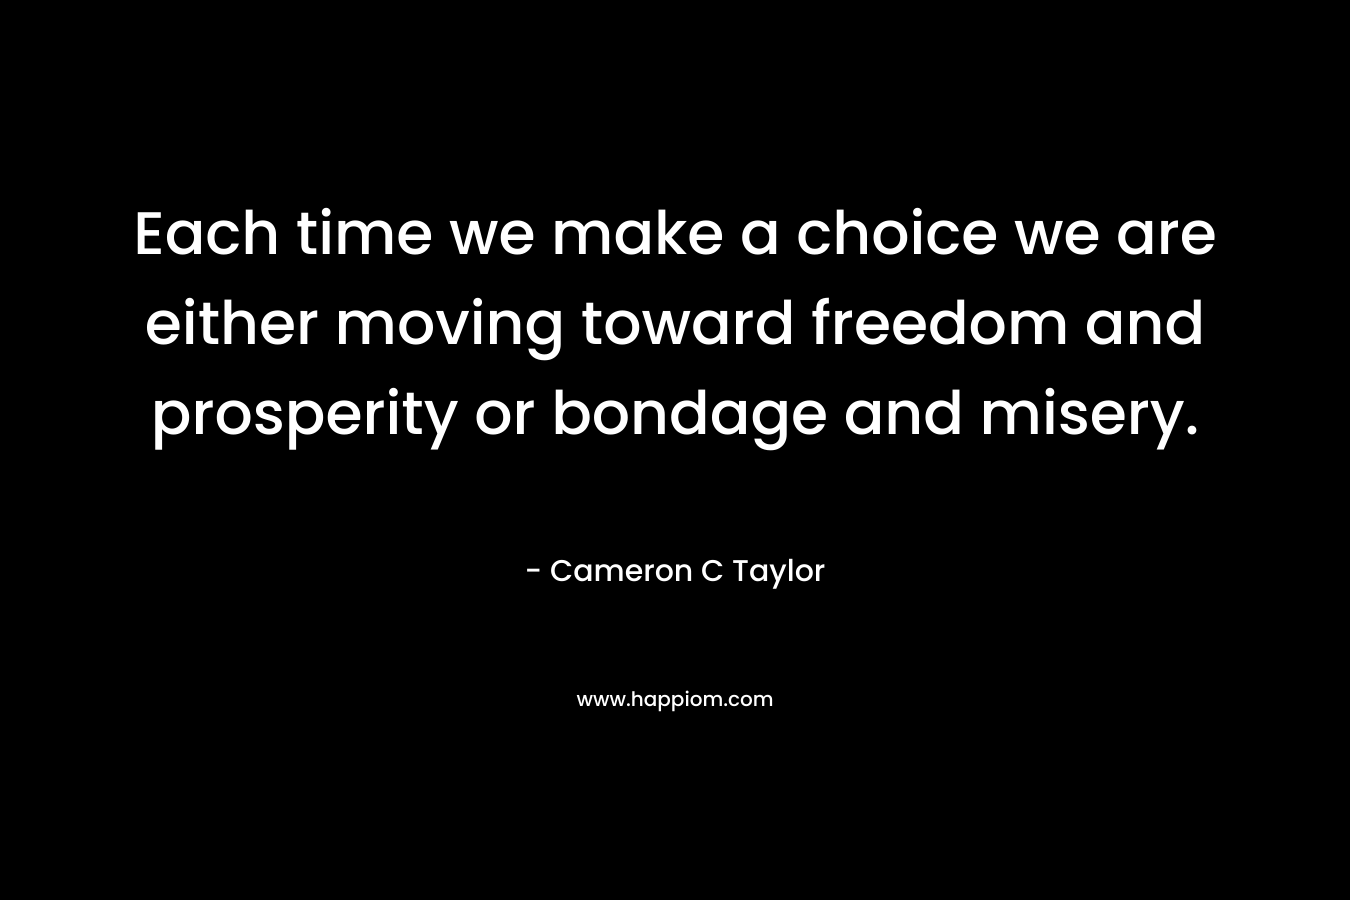 Each time we make a choice we are either moving toward freedom and prosperity or bondage and misery. – Cameron C Taylor